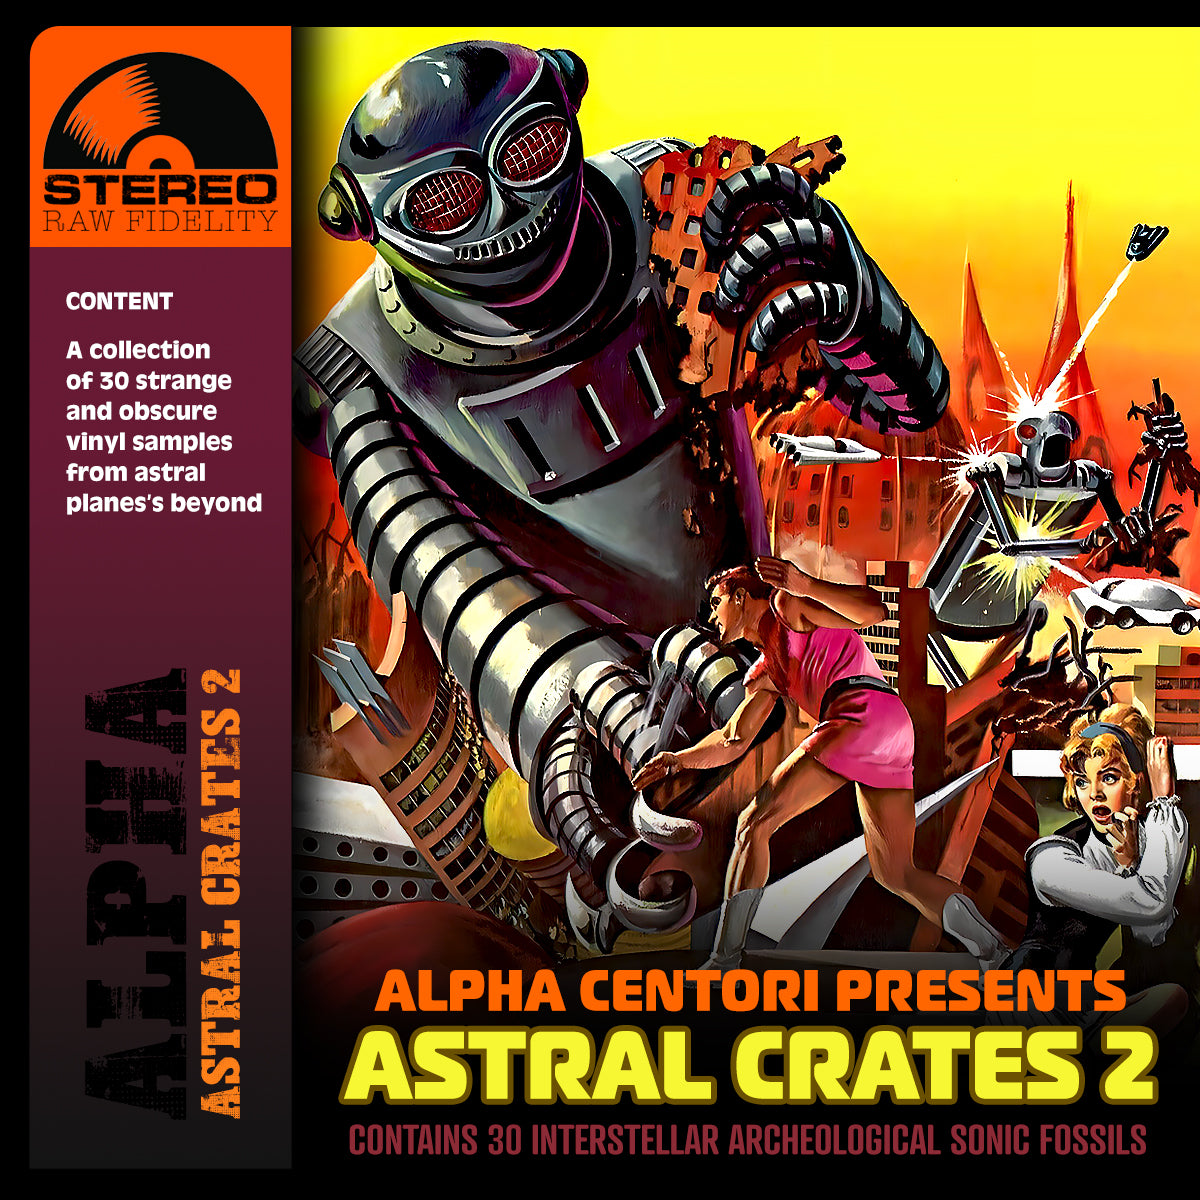 Astral Crates 2